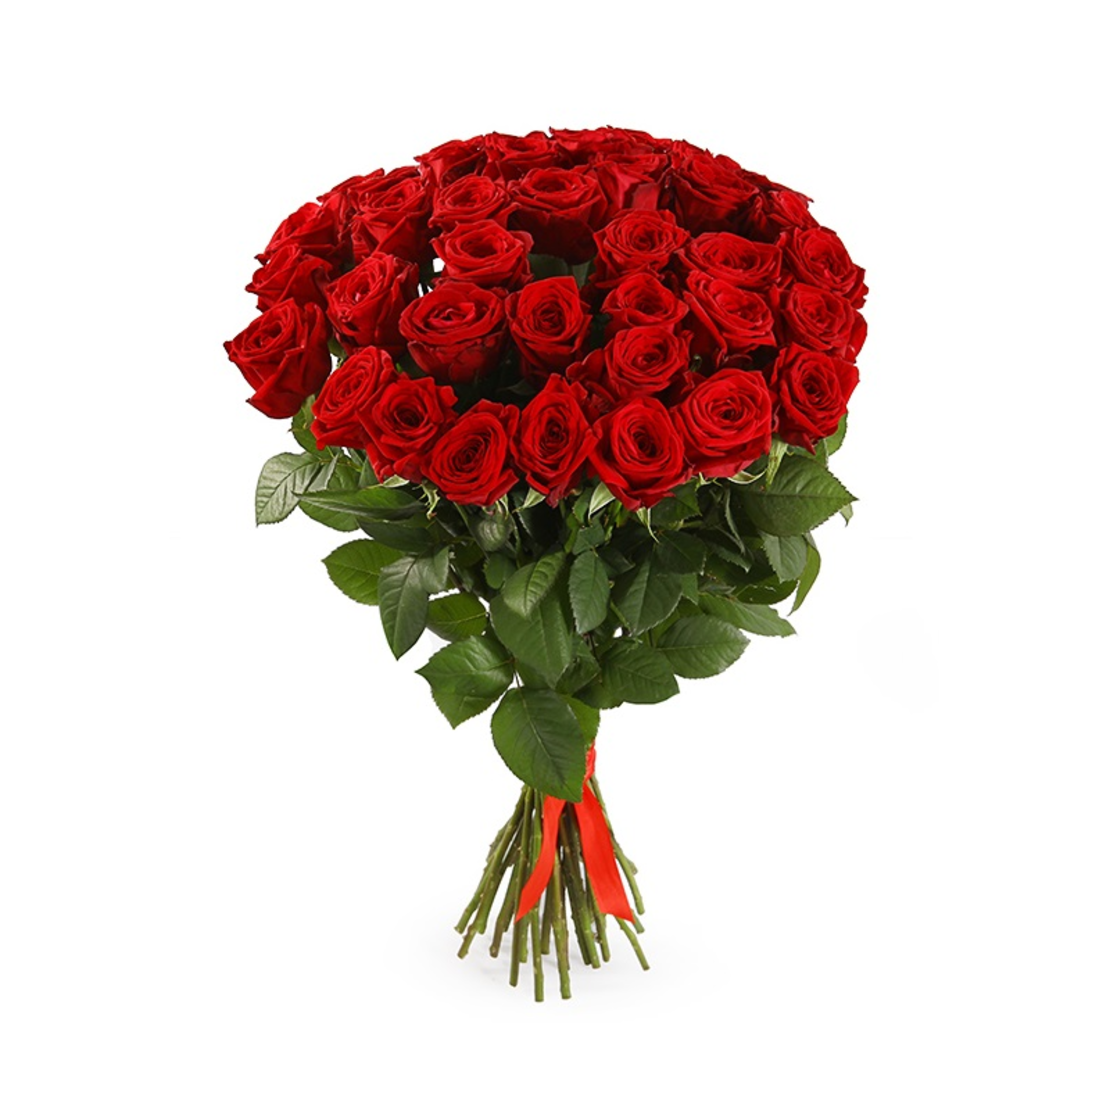 Bouquet of 31 red roses #29